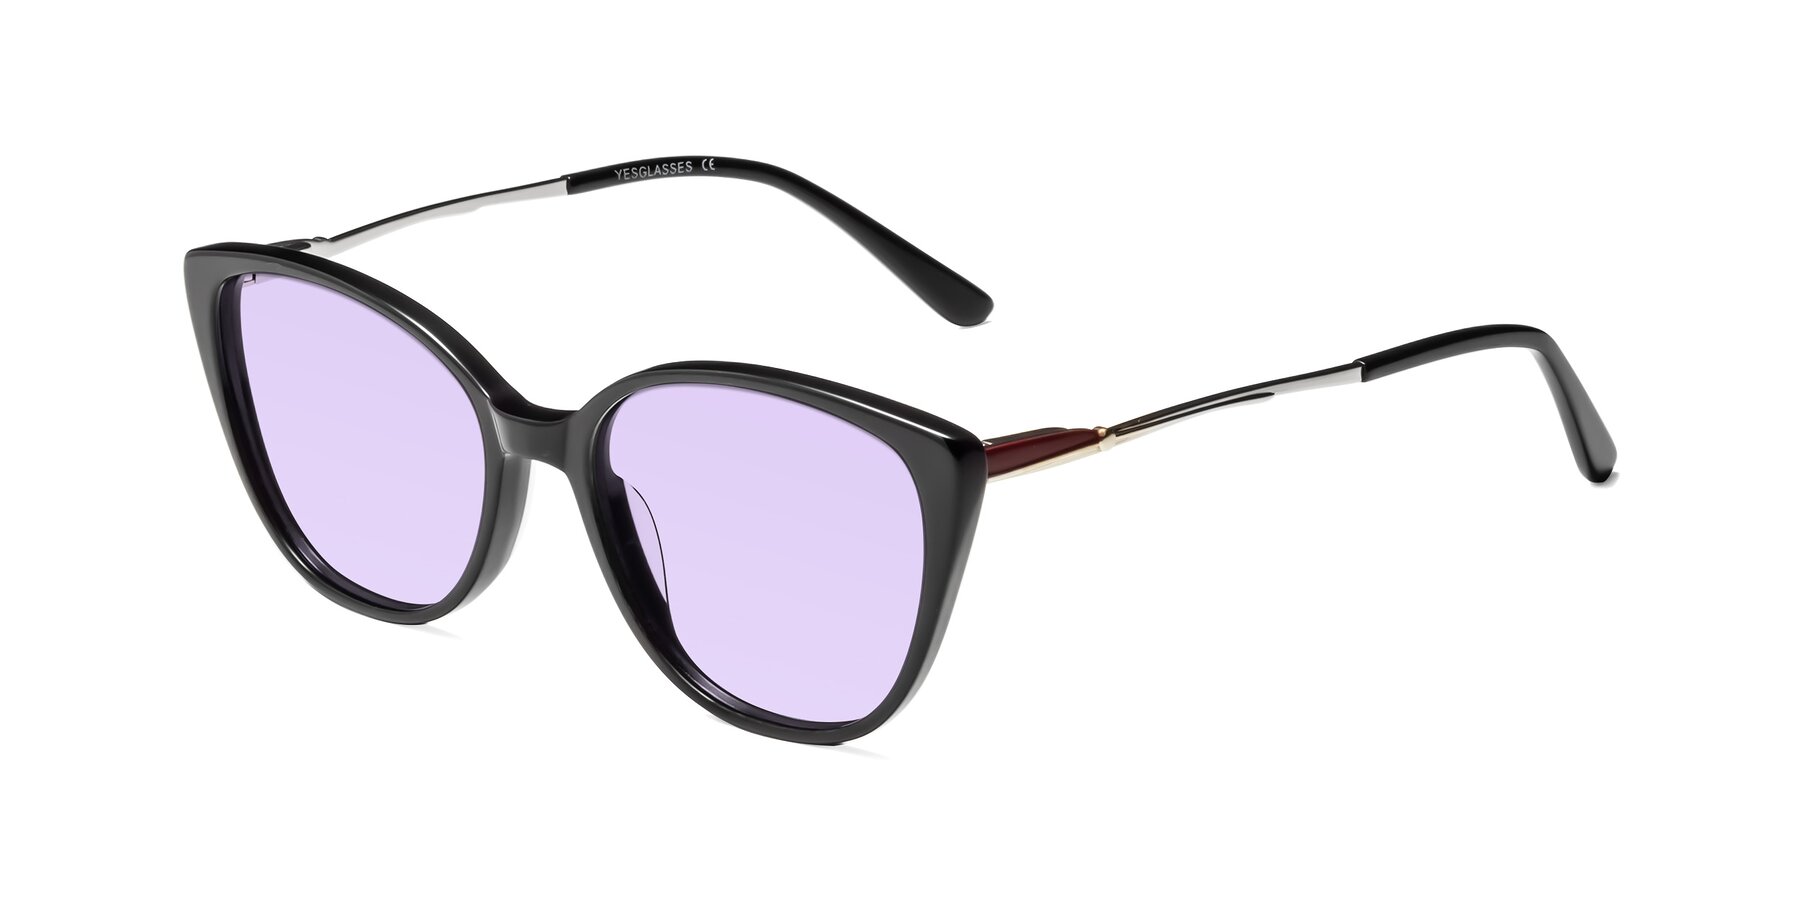 Angle of 17424 in Black with Light Purple Tinted Lenses